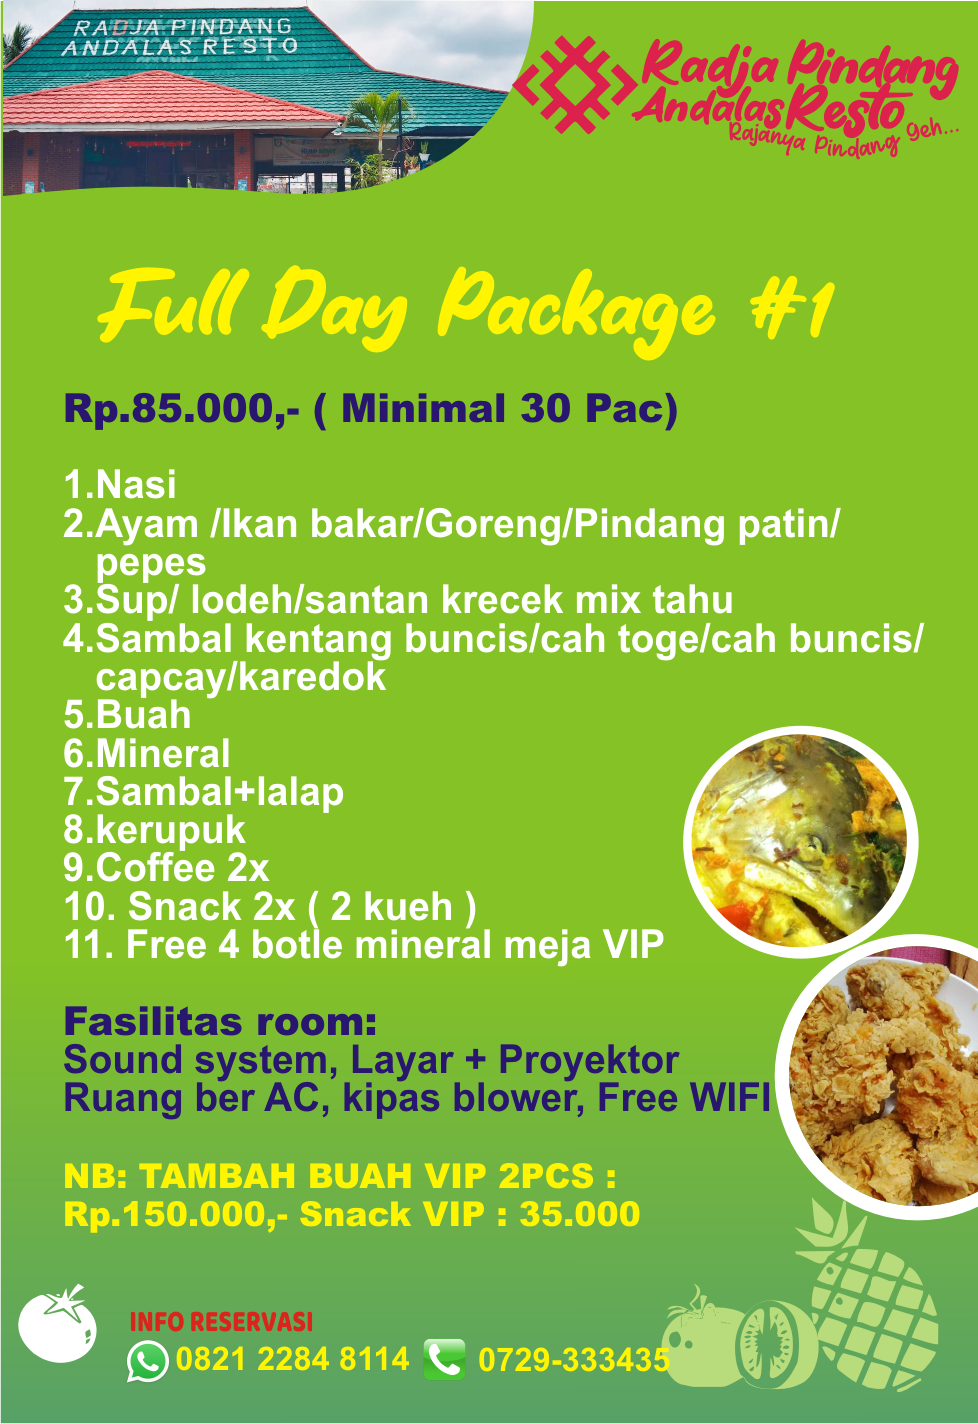 FULL DAY PACKAGE #1